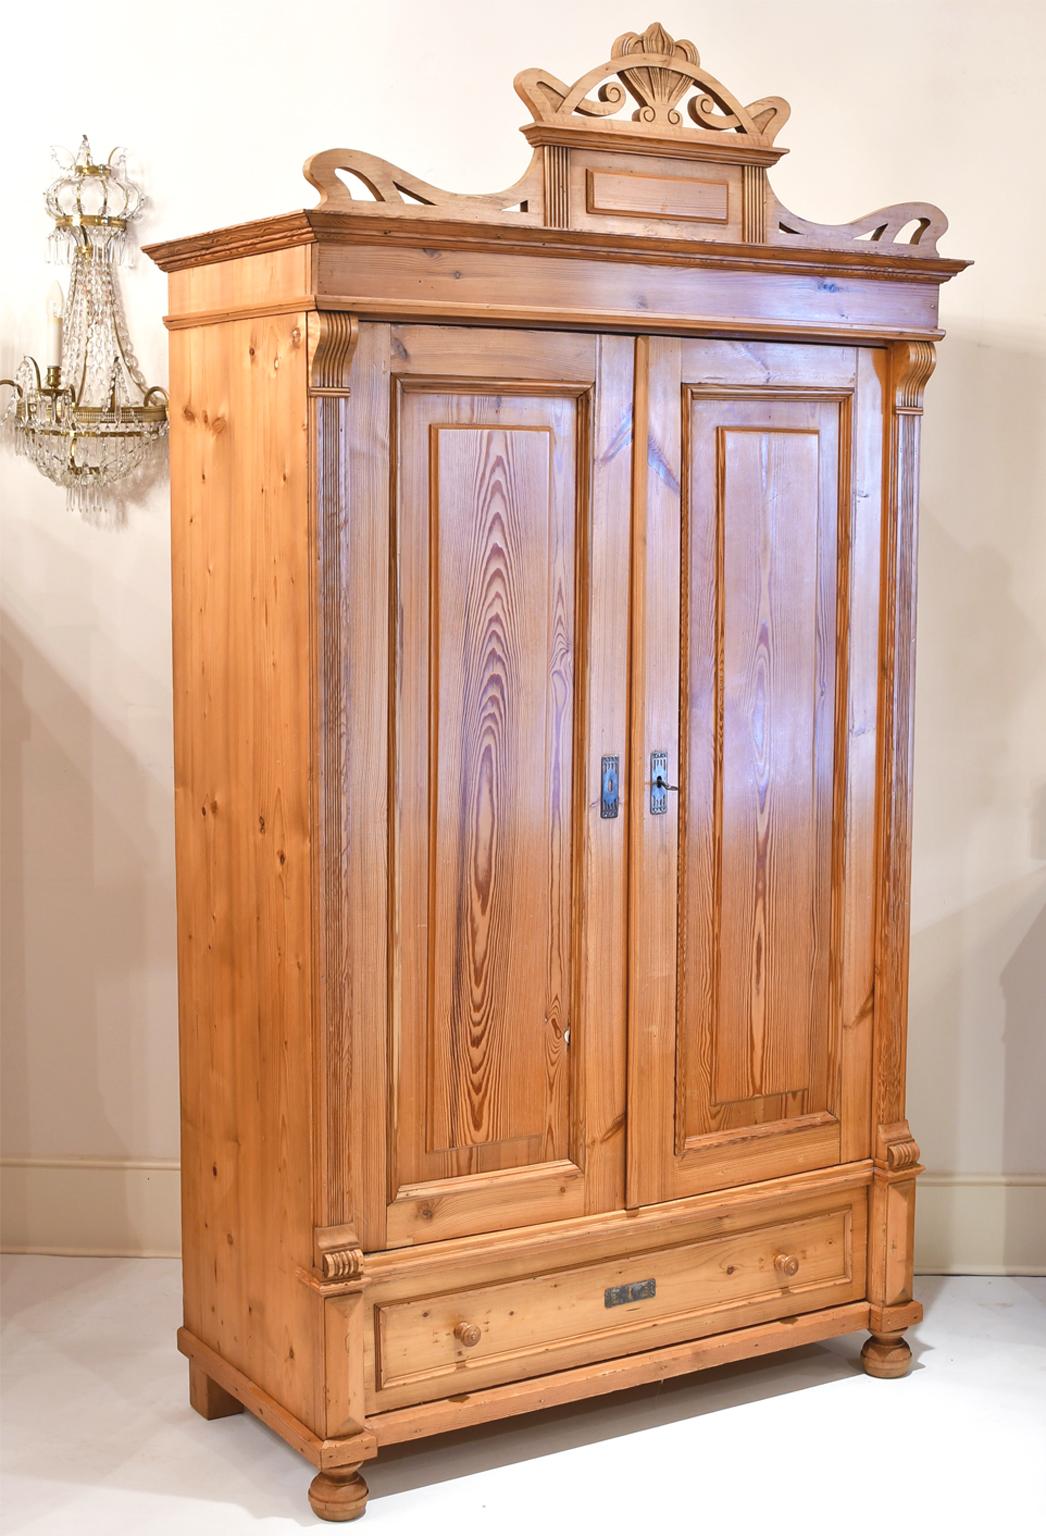 Jugendstil is synonymous with Art Nouveau, Jugendstil being from Northern Europe, specifically Germany and Art Nouveau being from France, This Jugendstil armoire that is a wonderful example of the period has survived mostly intact with its original